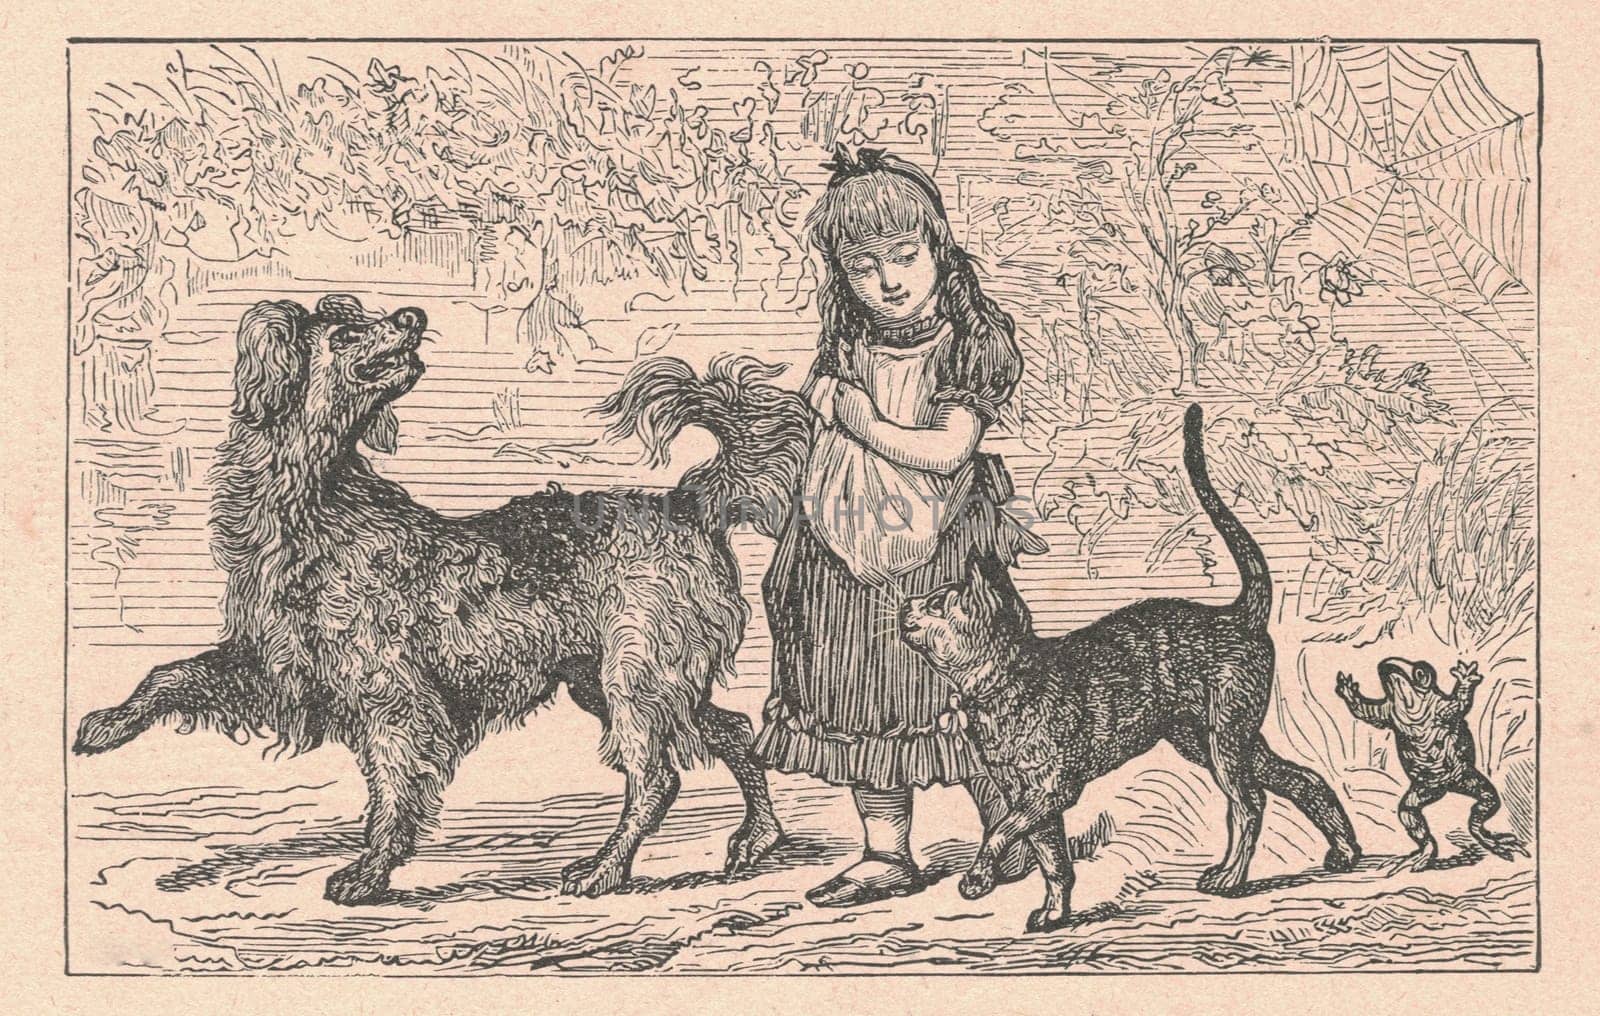 Black and white antique illustration shows a girl goes for a walk with a dog, cat and frog. Vintage drawing shows the girl goes for a walk with animals. Old picture from fairy tale book. Storybook illustration published 1910. by roman_nerud